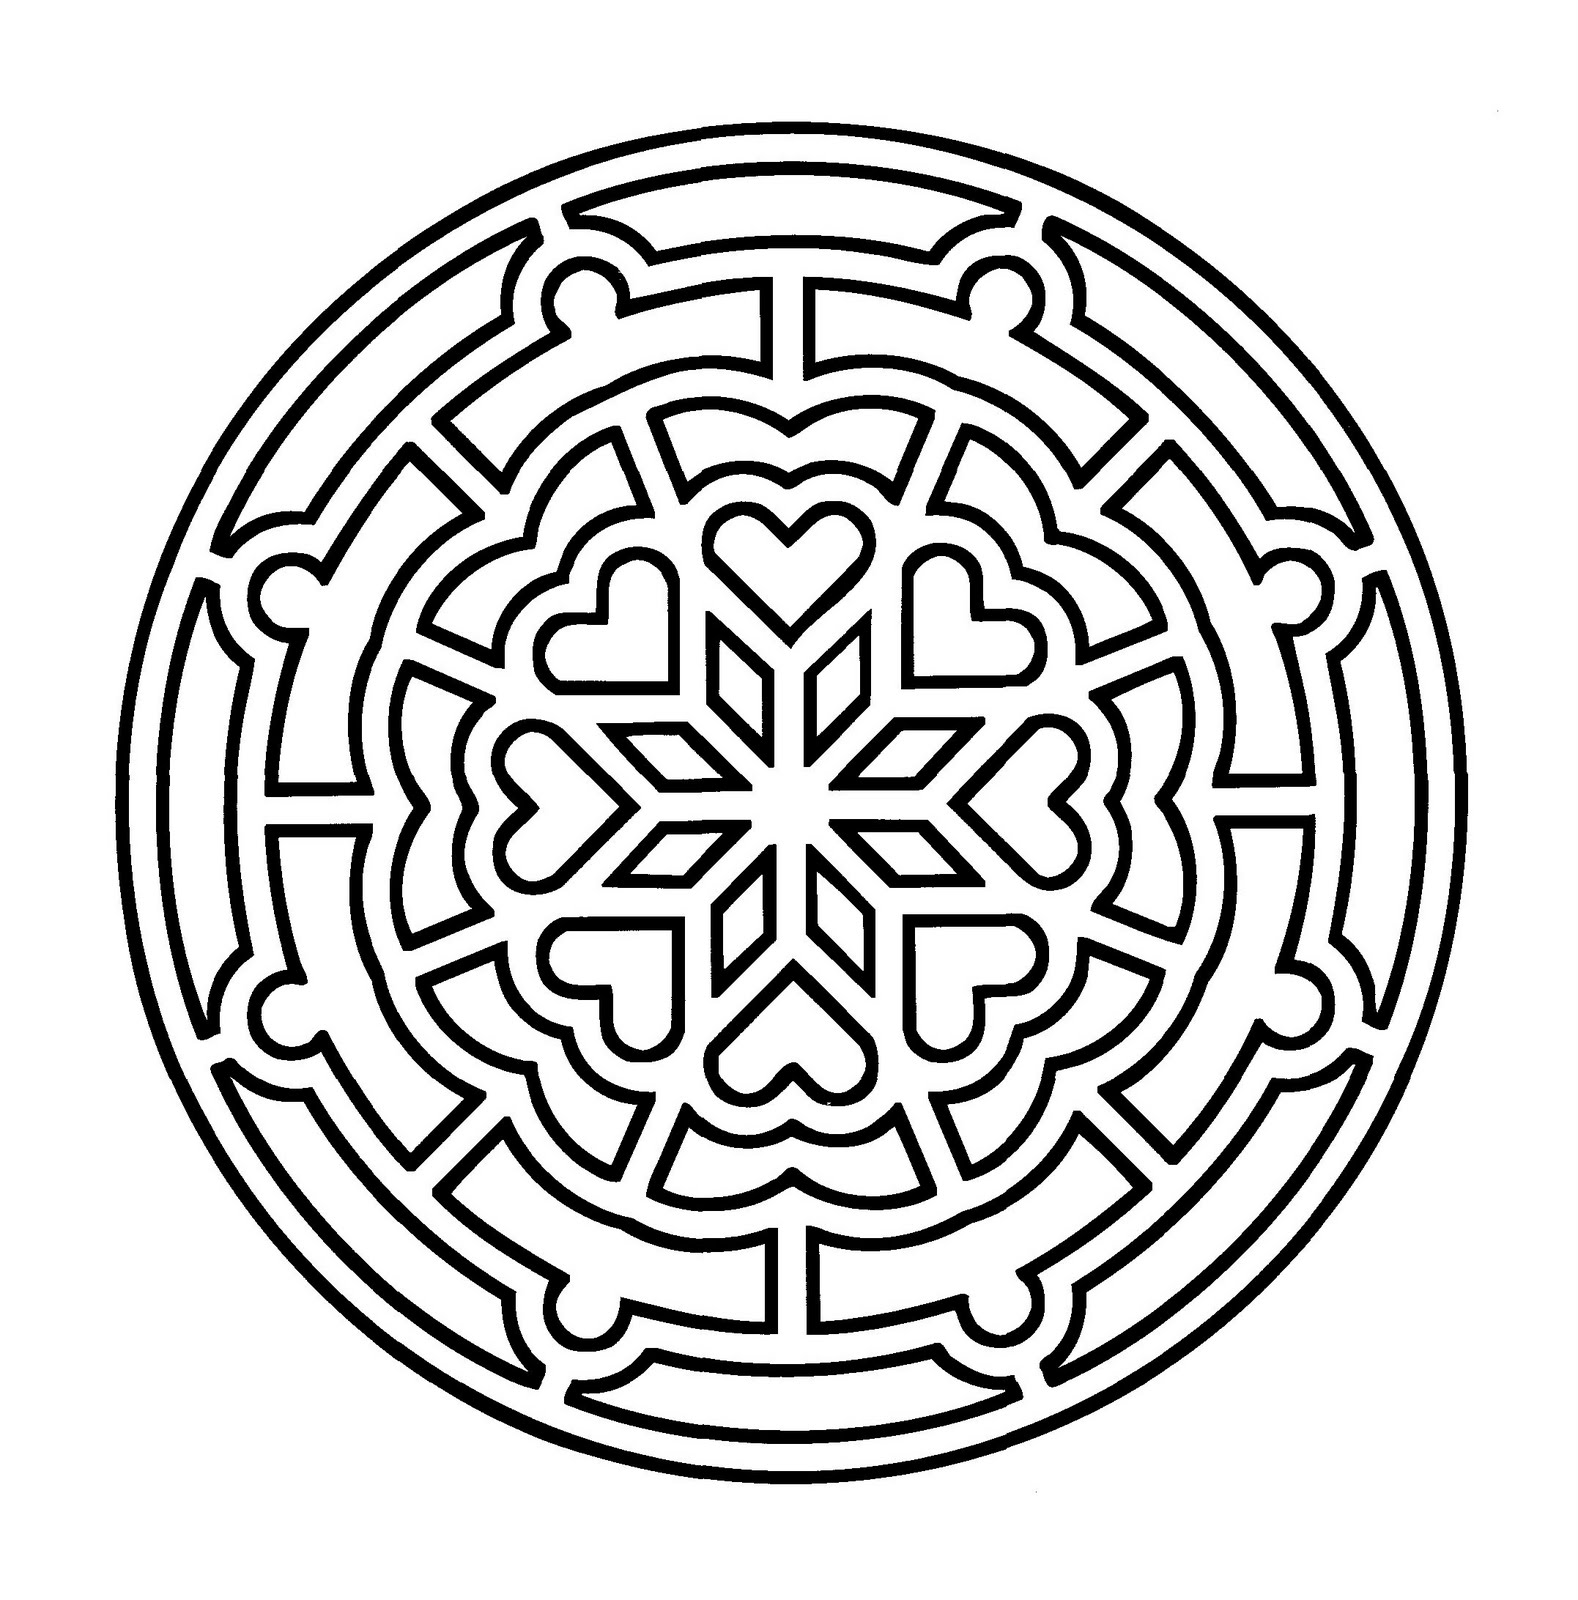 Mandala template drawn with thick lines, with geometric forms and hearts